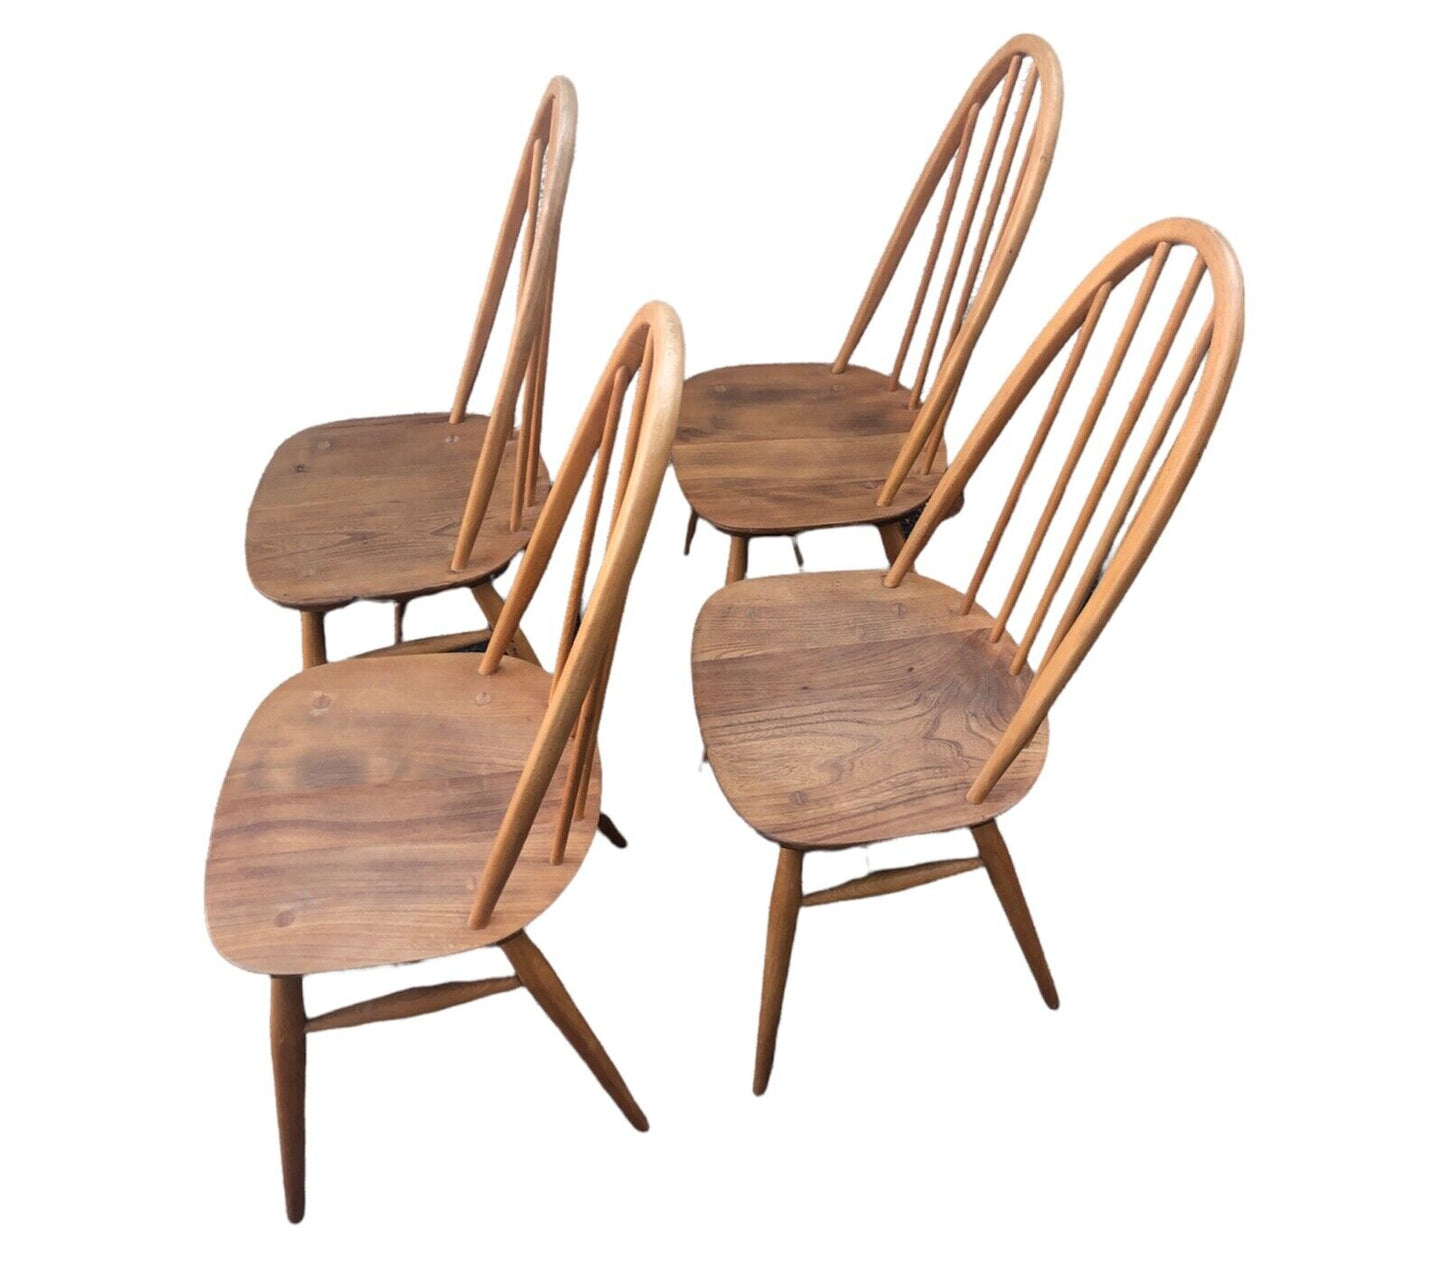 000919.....Handsome Set Of 4 Ercol Quaker Chairs ( sold )